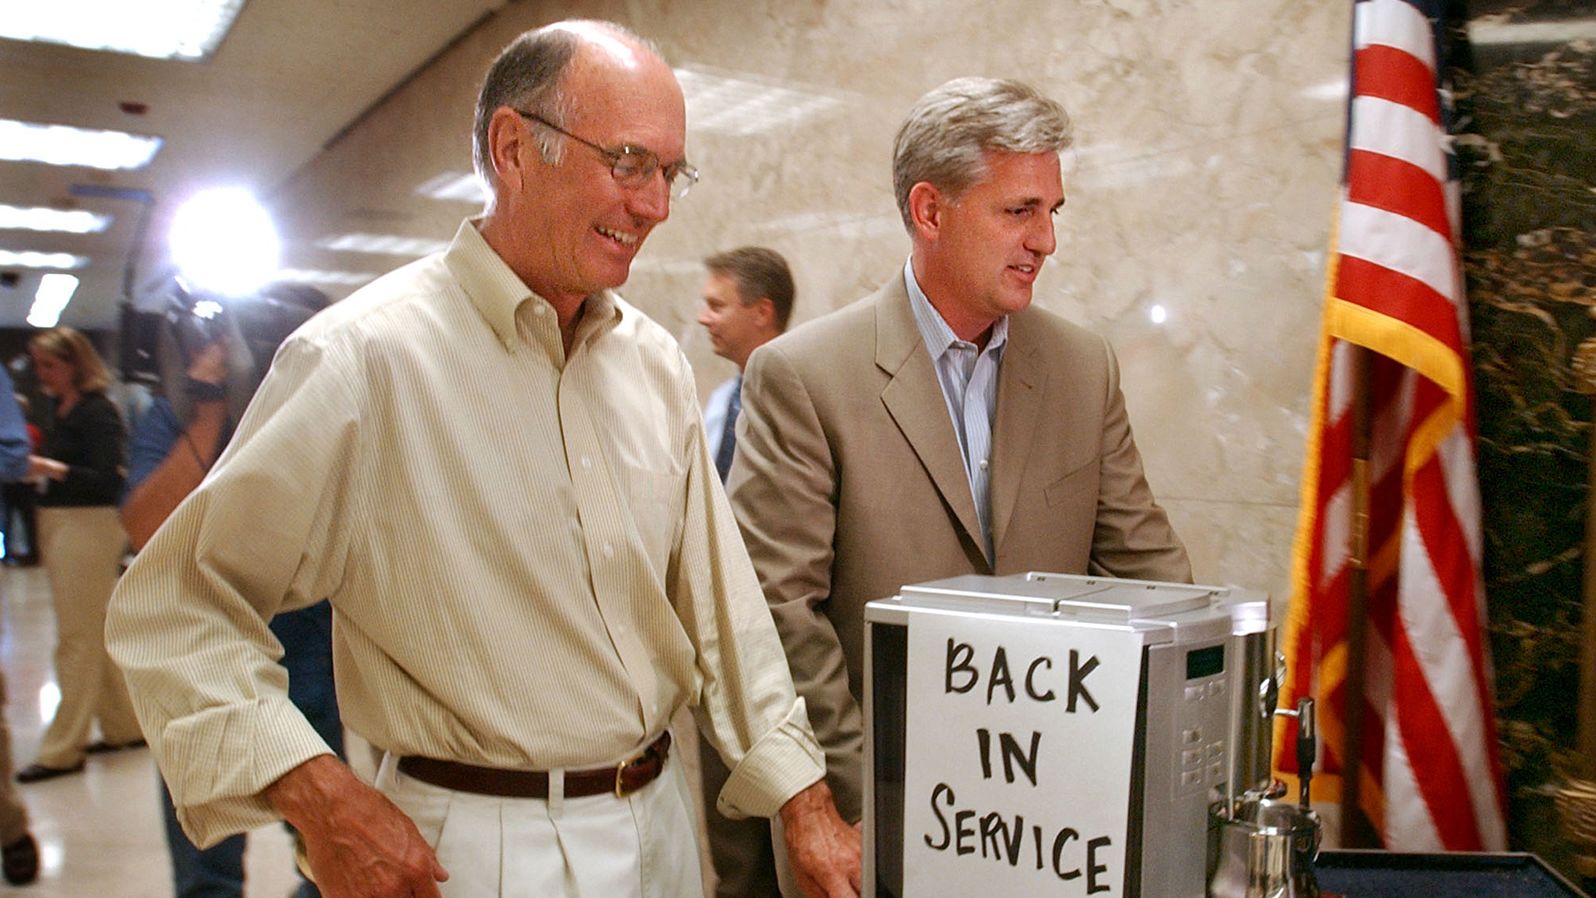 McCarthy and California state Sen. Dick Ackerman wheel a cappuccino machine into Gov. Schwarzenegger's office in July 2004. This was after Democratic state Sen. John Burton, who in the past had delivered freshly brewed coffee to his meetings with Schwarzenegger, announced that he would withhold the services of his coffee maker because Schwarzenegger called his political opponents "girlie men."